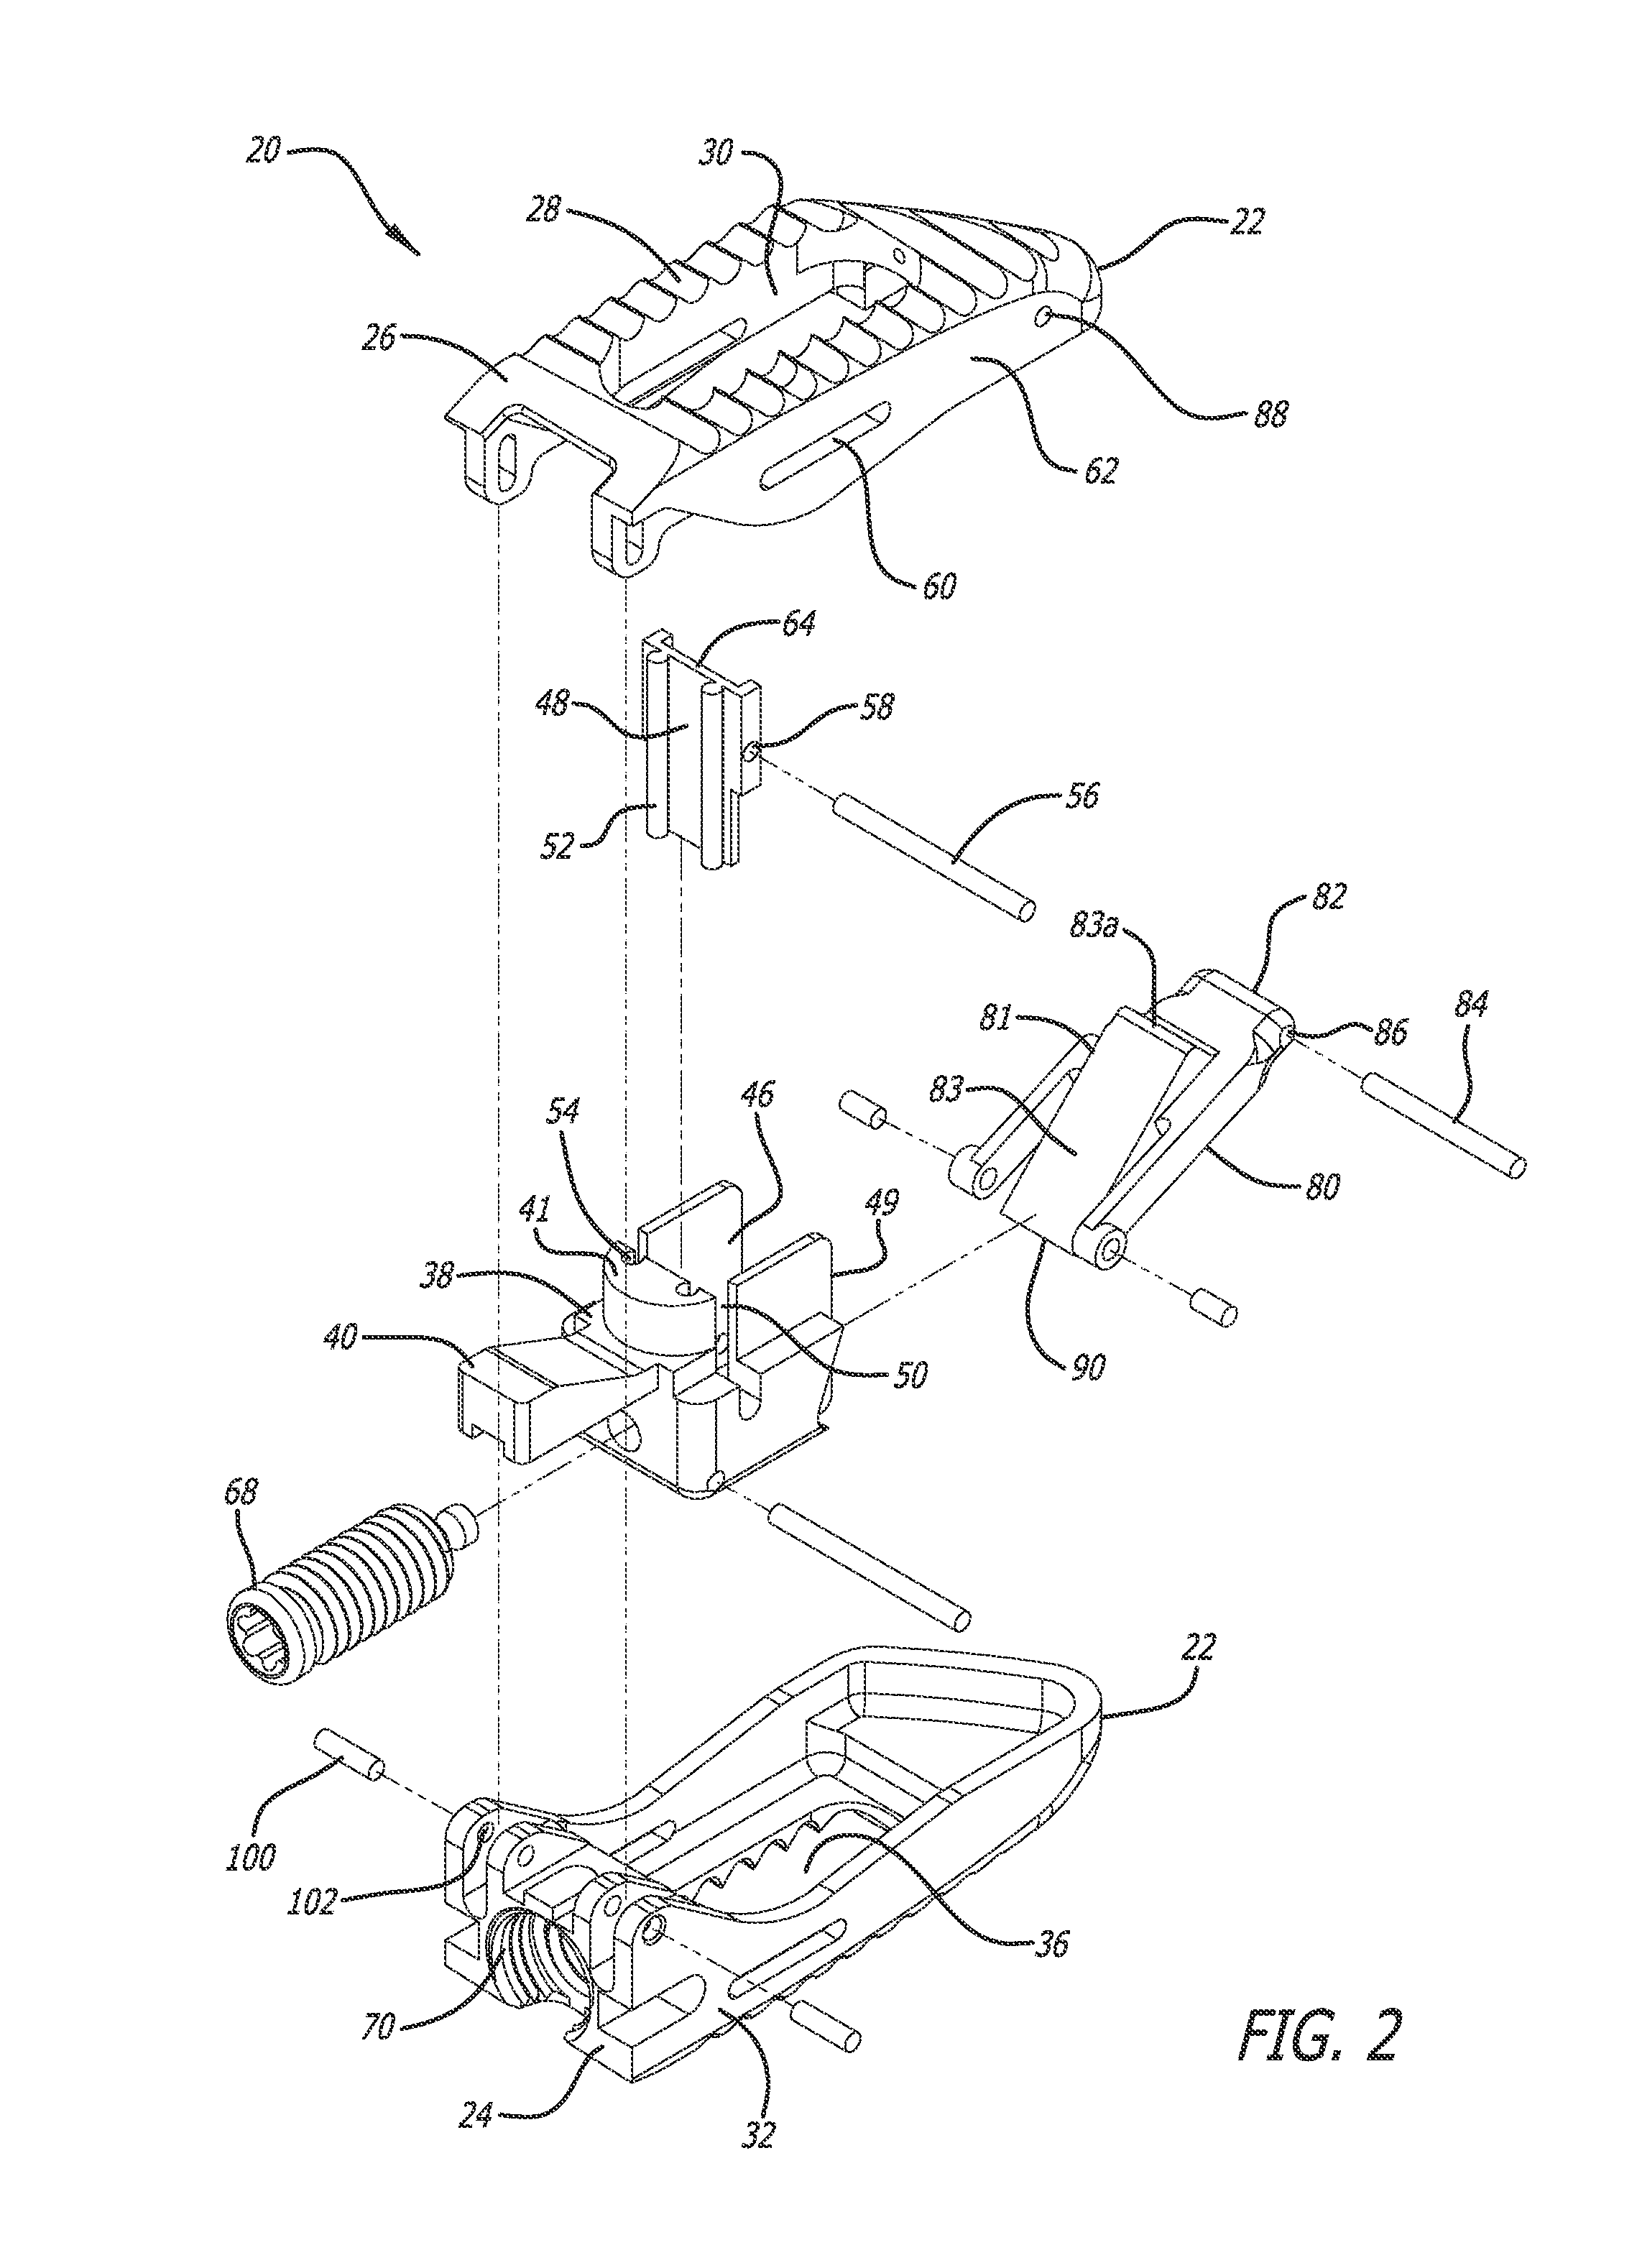 Expandable interbody implant